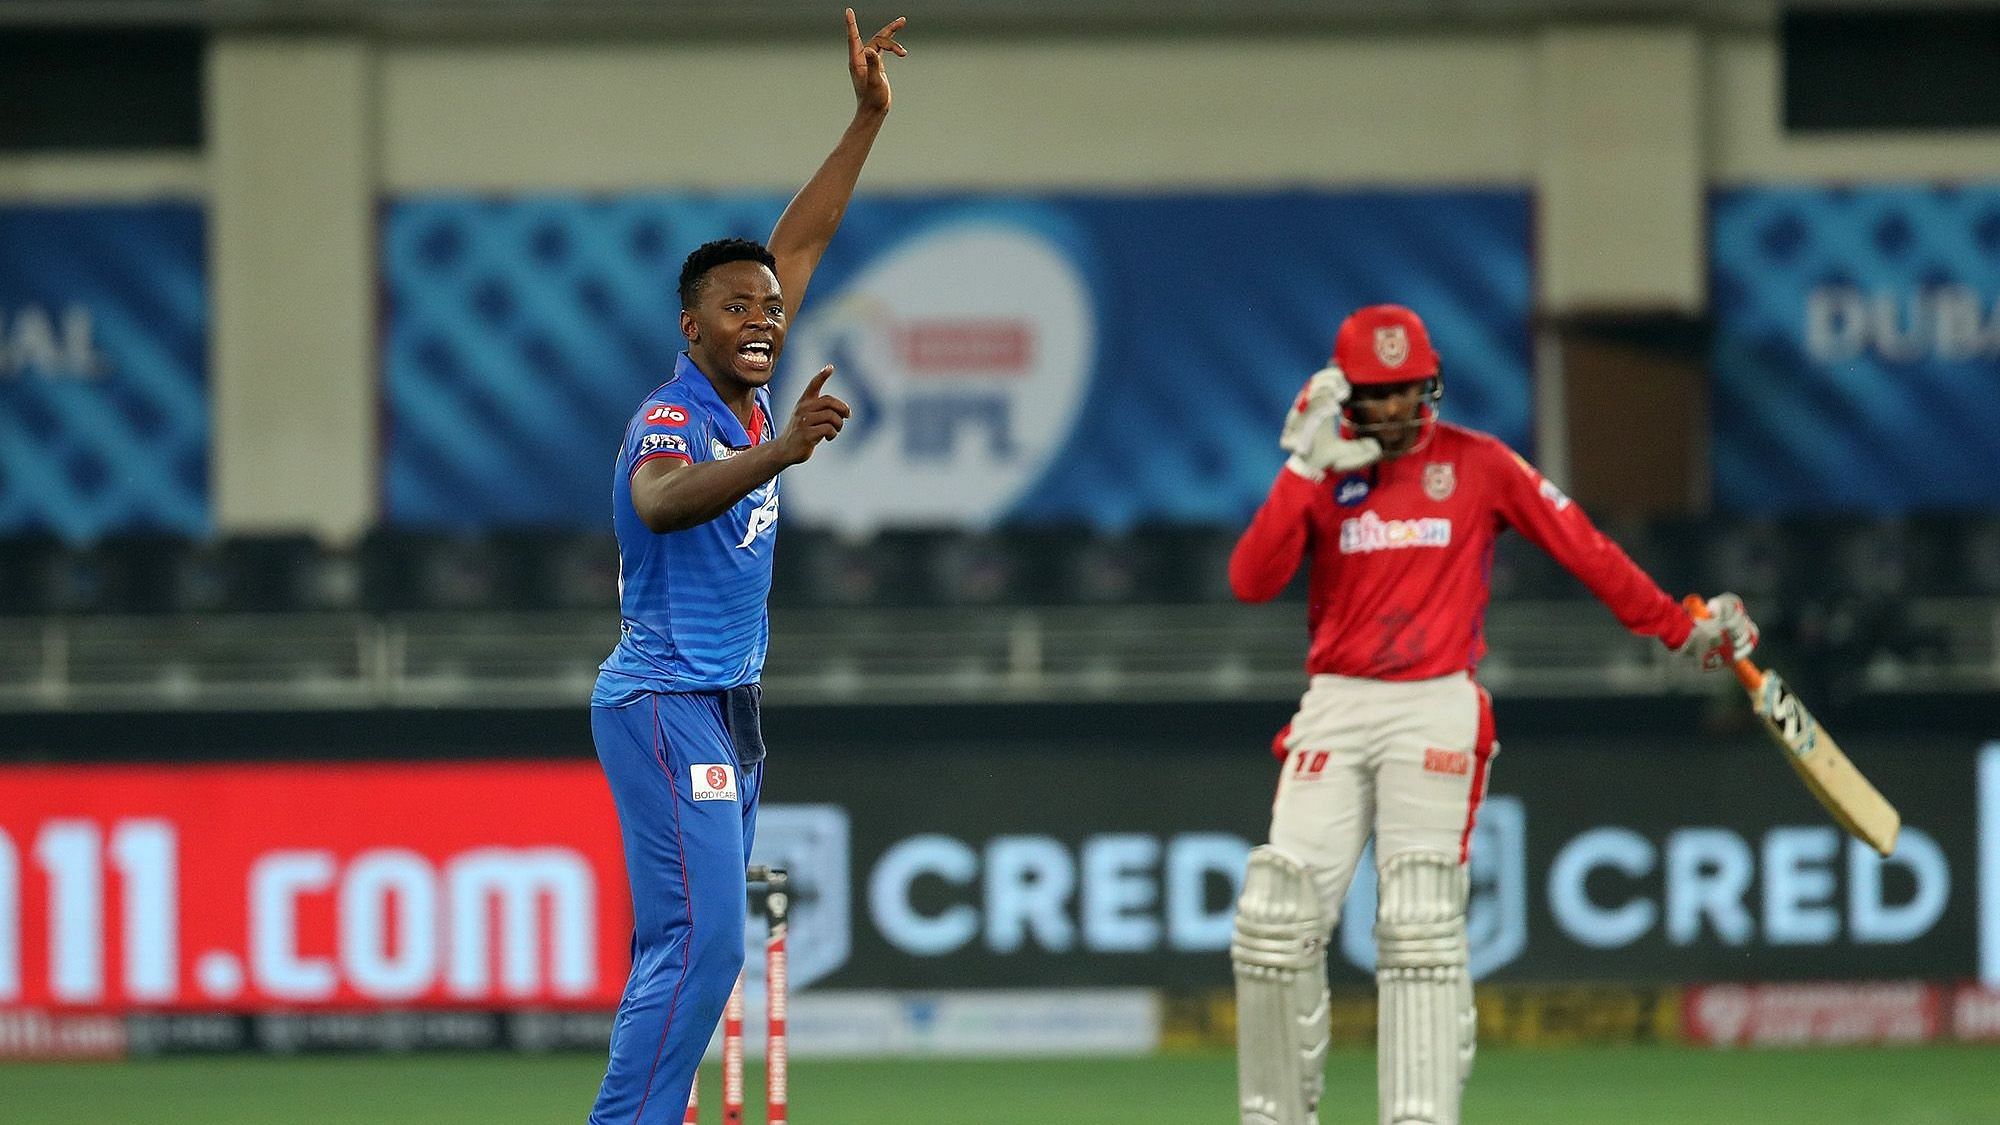 Kagiso Rabada came out on top, after entrusted with bowling again in a Super Over